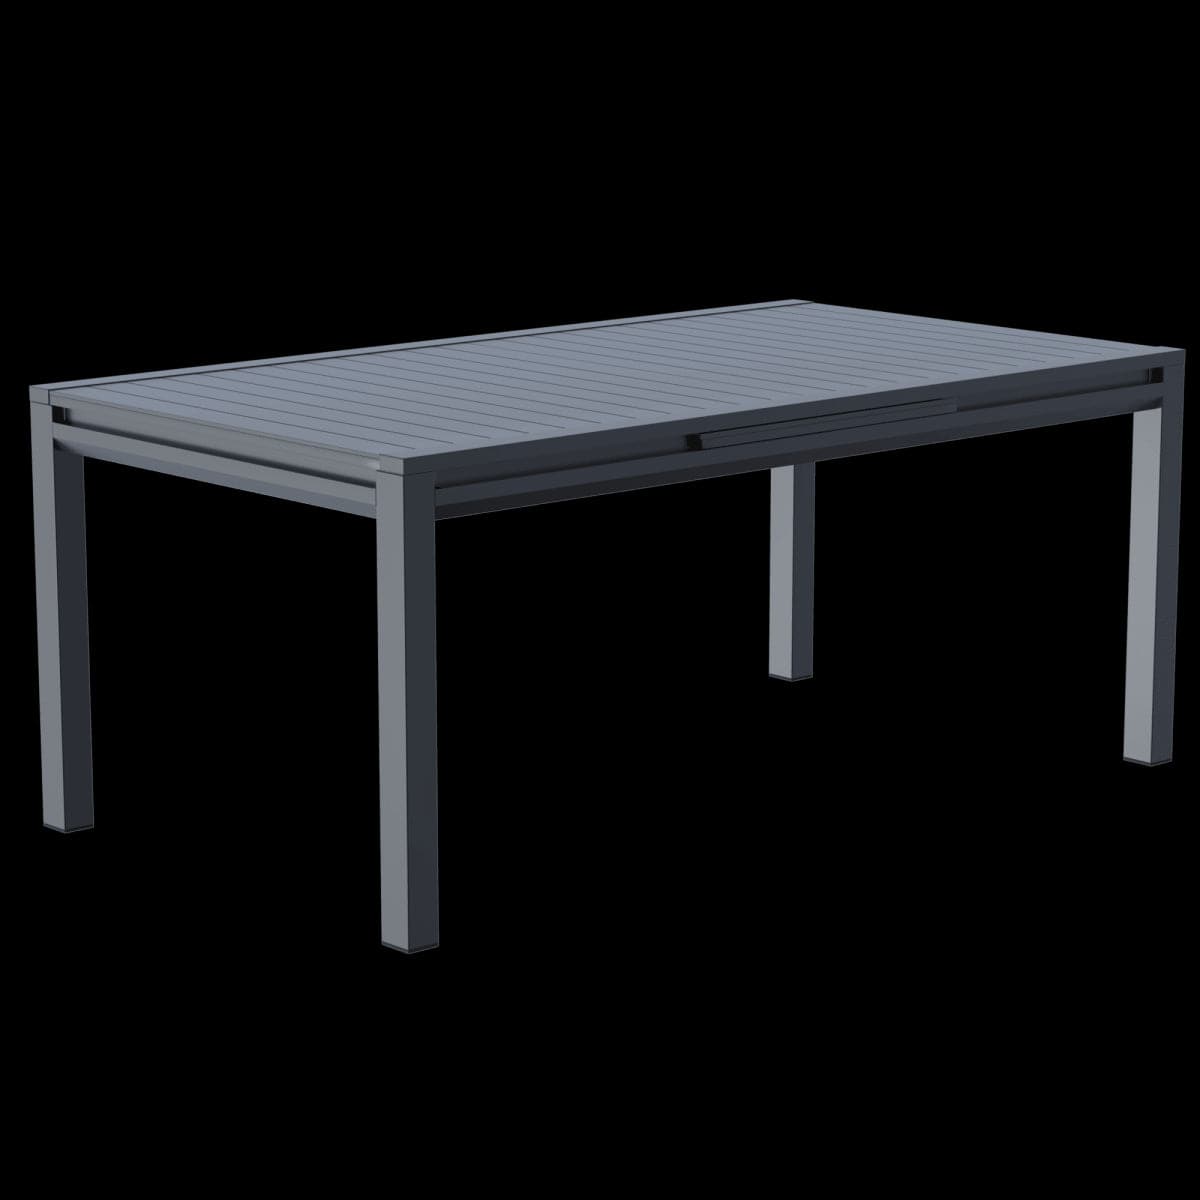 ODYSSEA II NATERIAL 180/240X100 ANTHRACITE EXTENDING TABLE - best price from Maltashopper.com BR500013641